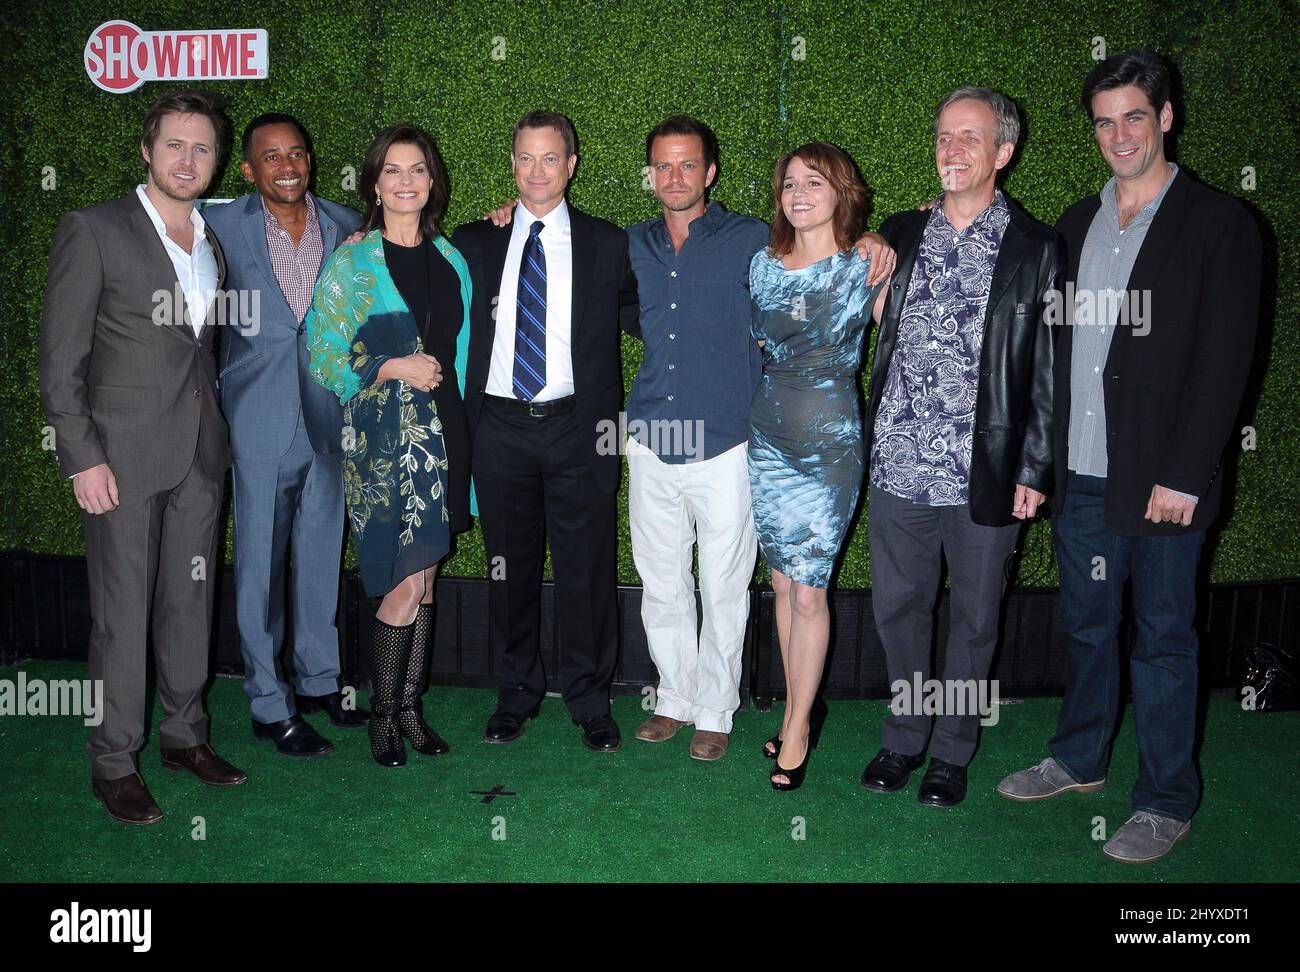 A.J. Buckley, Hill Harper, Seal Ward, Gary Sinise, Carmine Giovinazzo, Anna Belkap, Robert Joy and Eddie Cahill cast of 'CSI: New York' arriving for 2010 CBS Summer Press Tour Party held at The Tent in Beverly Hills, California on July 28, 2010. Stock Photo